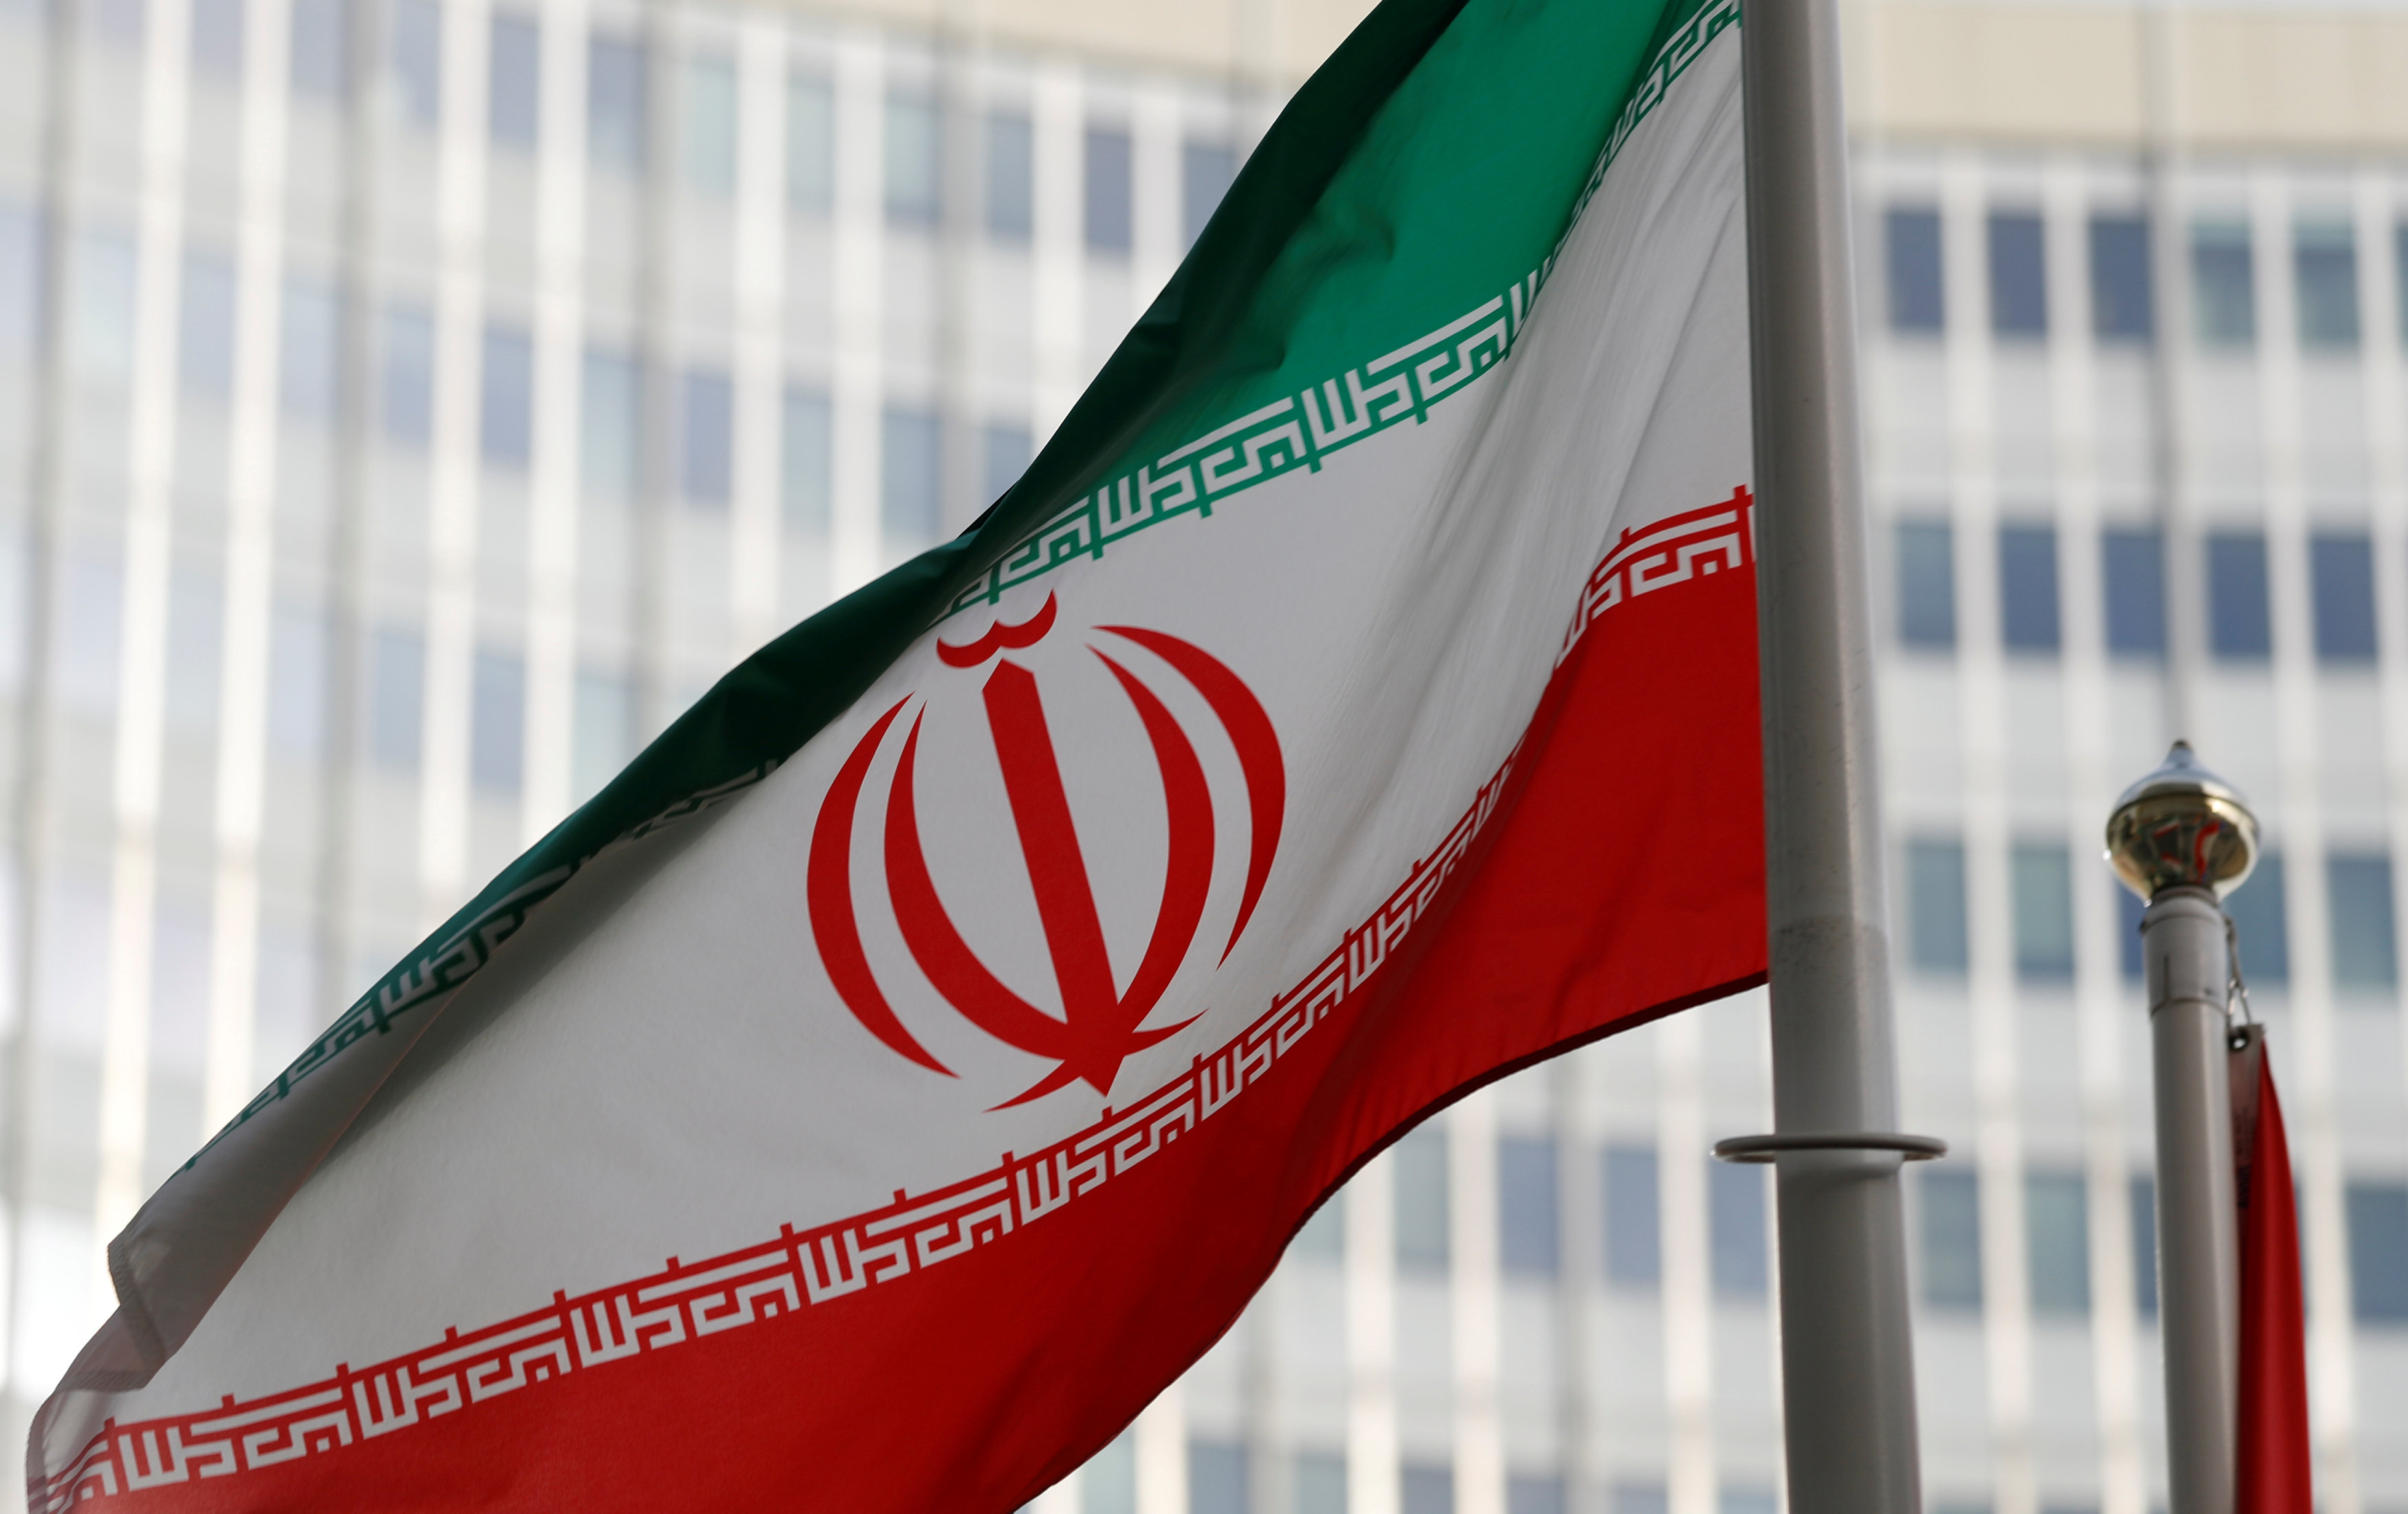 The Iranian flag flutters in front the International Atomic Energy Agency (IAEA) headquarters in Vienna, Austria March 4, 2019.